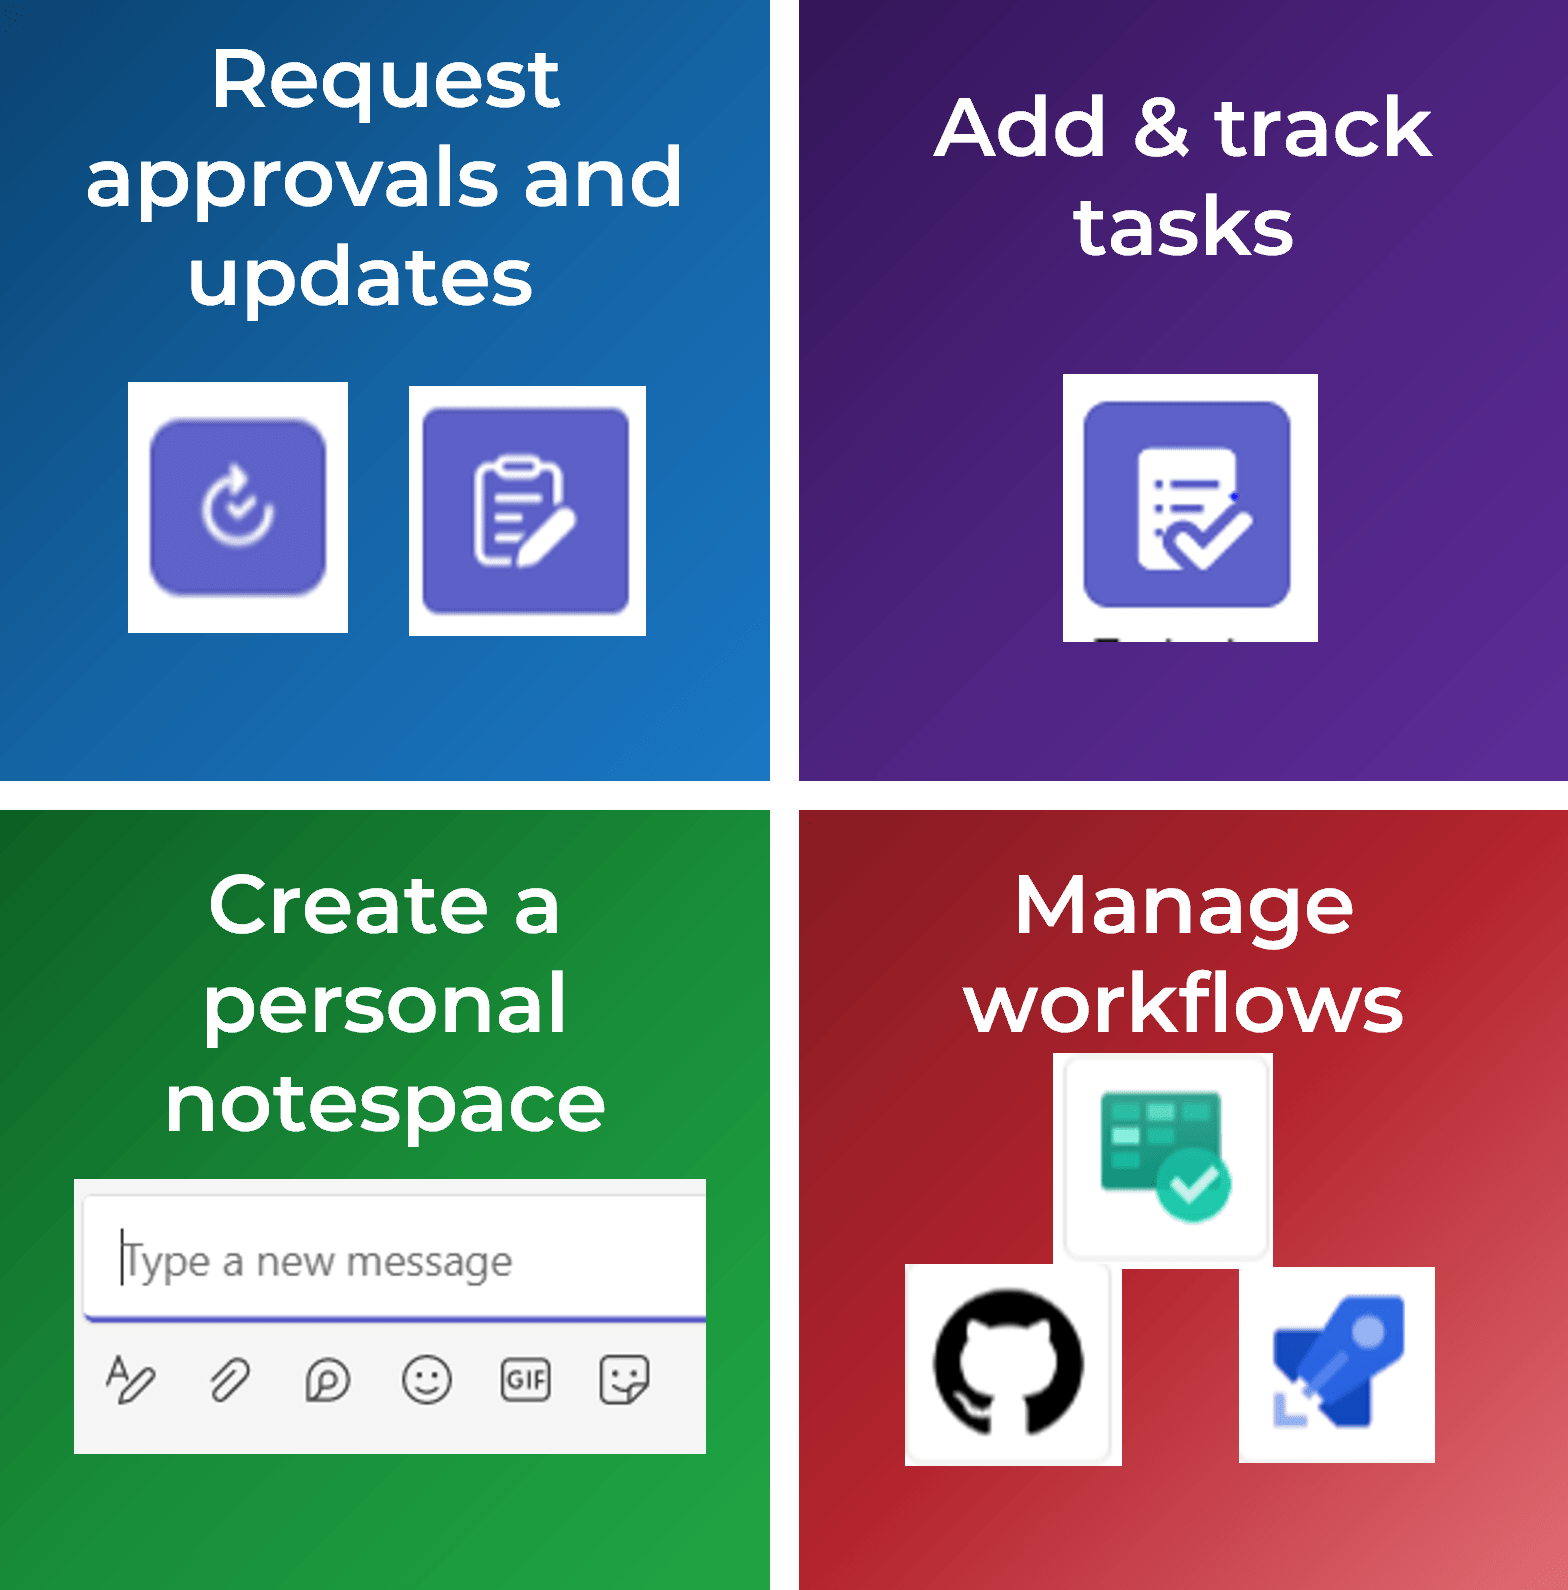 Samples of four features: 'Request approvals and updates', 'Add & track tasks', 'Create a personal notespace', and 'Manage workflows'.